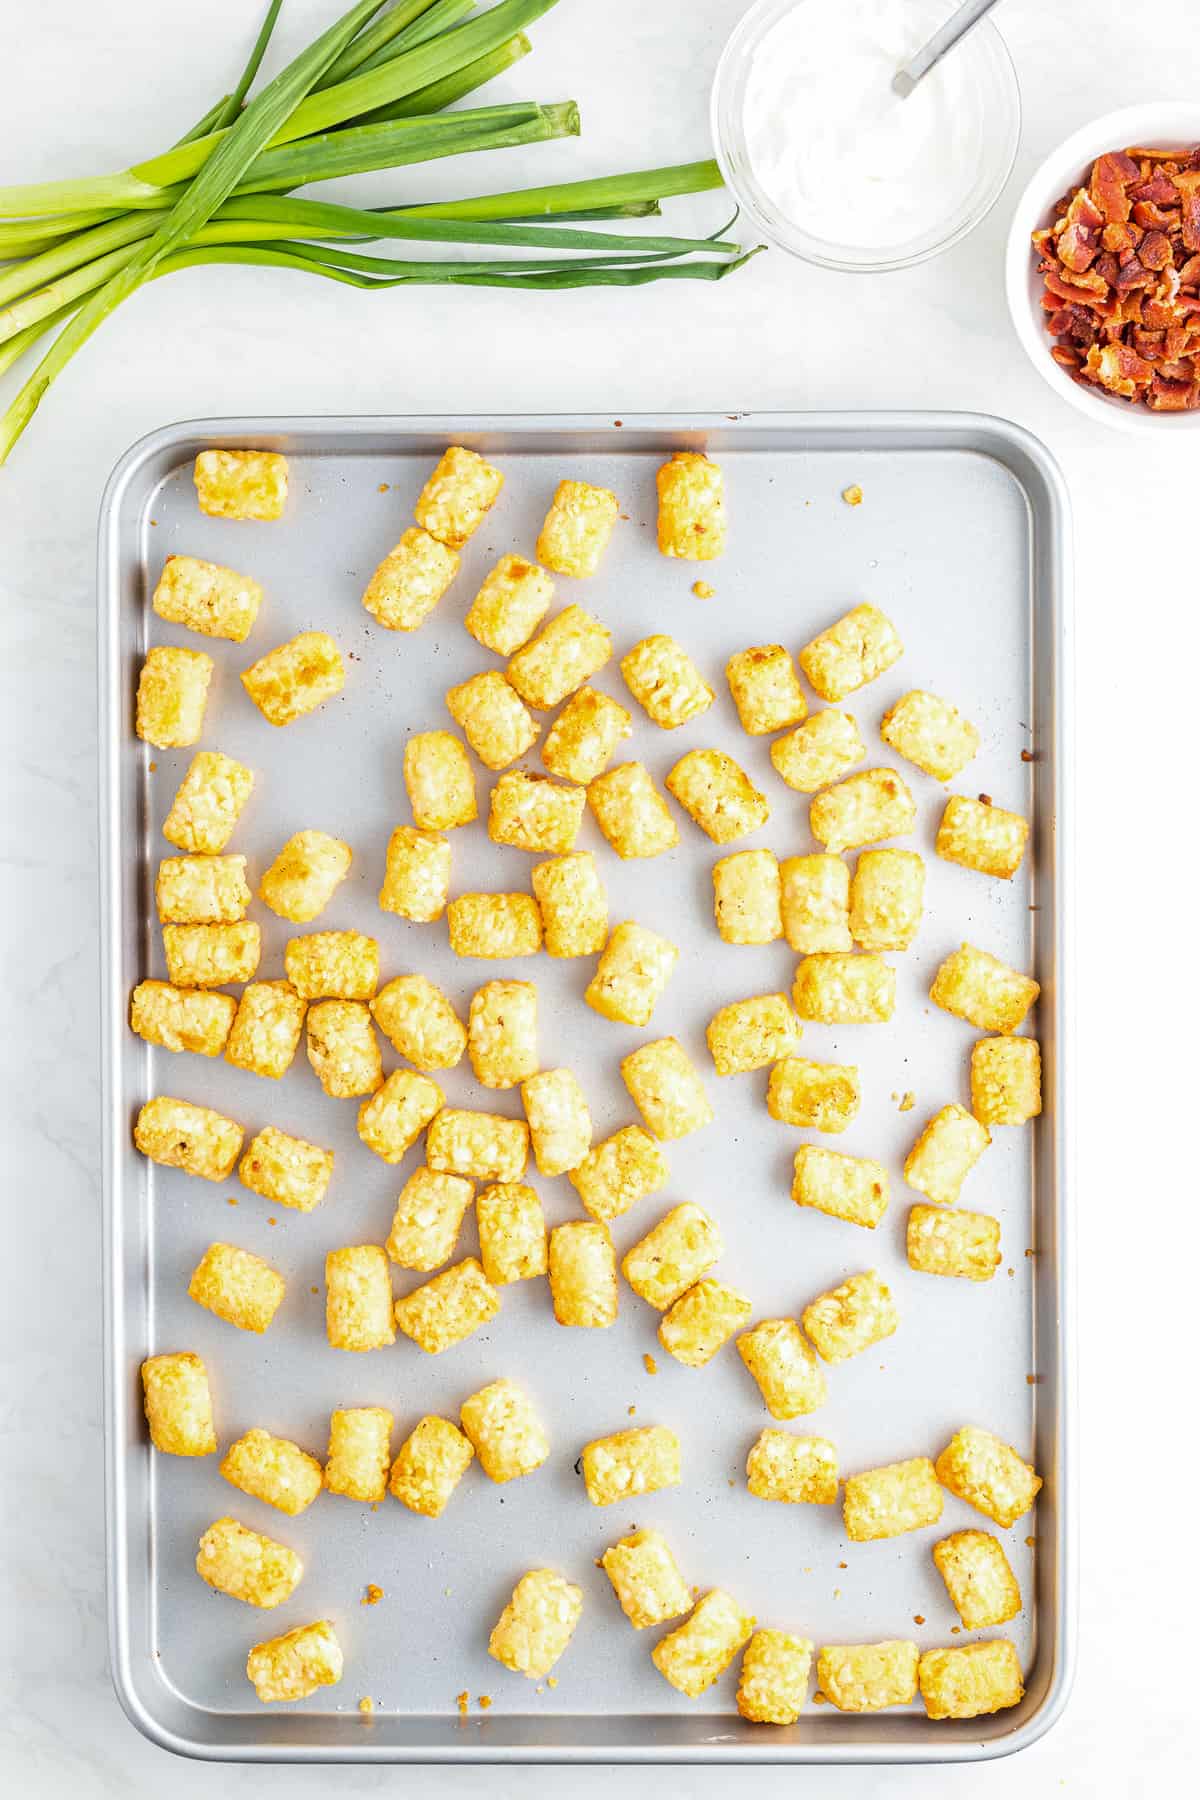 Baking sheet with baked tater tots